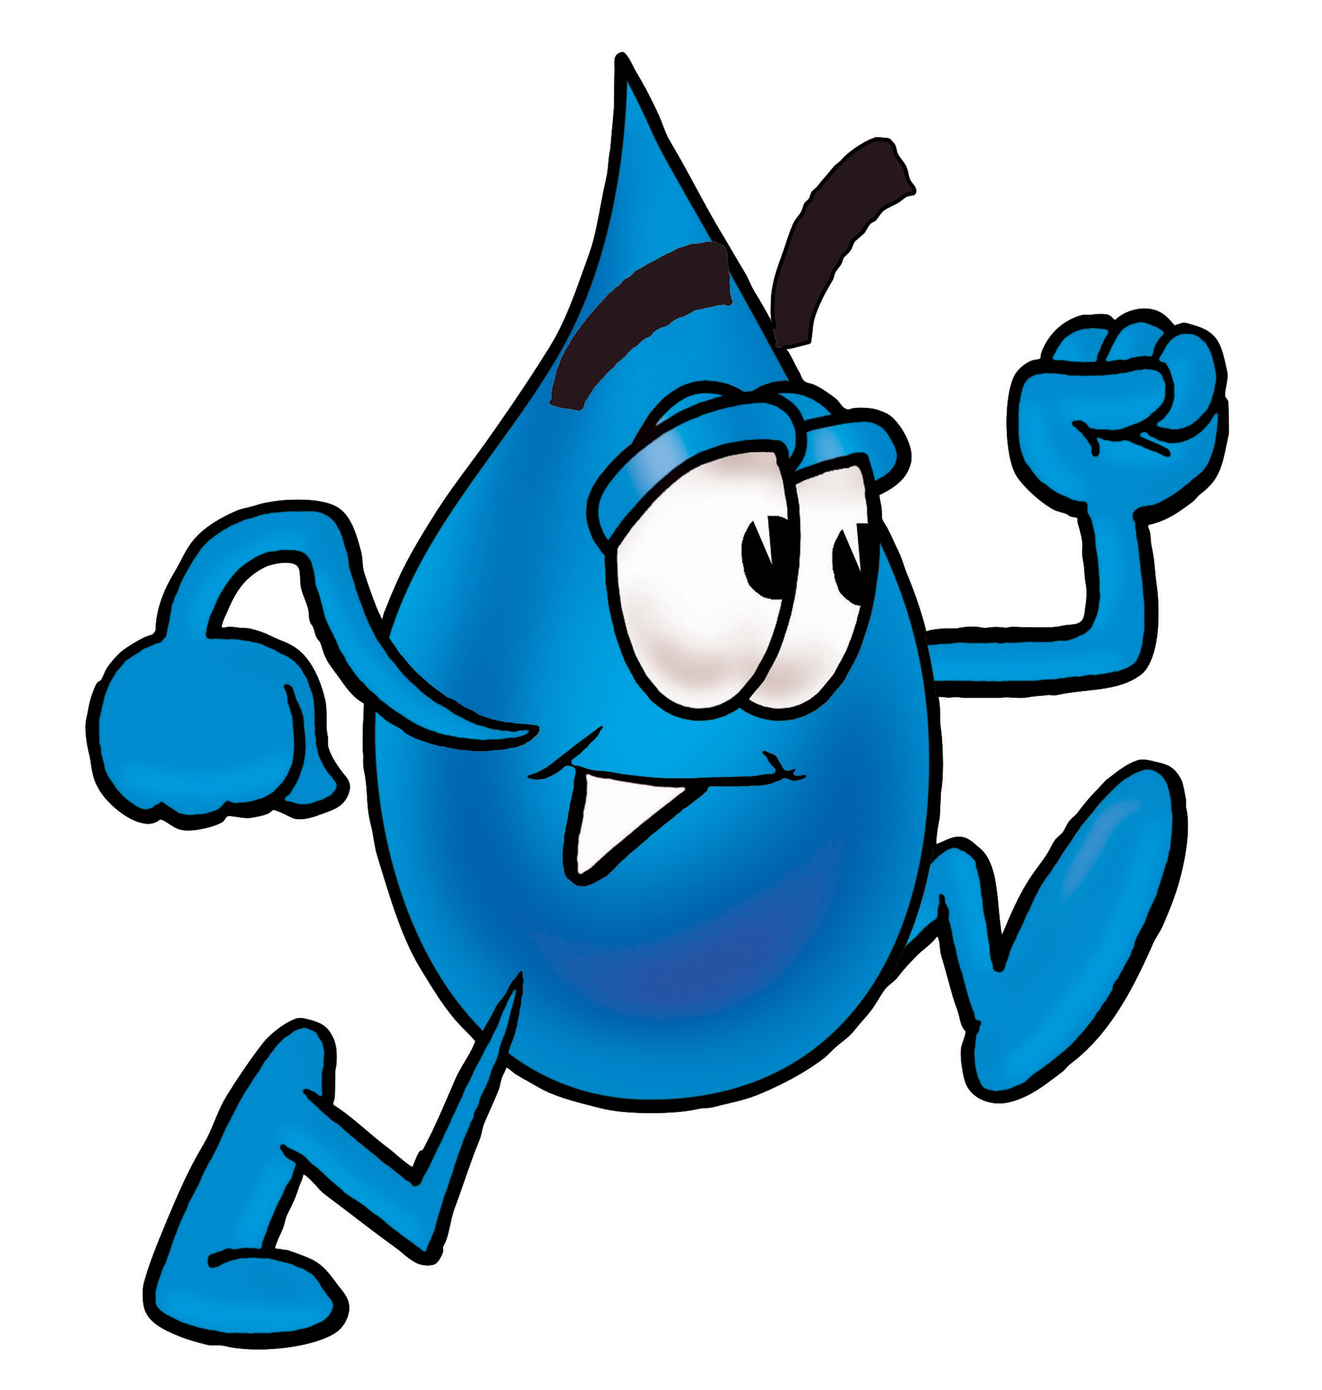 water cycle clip art - photo #33